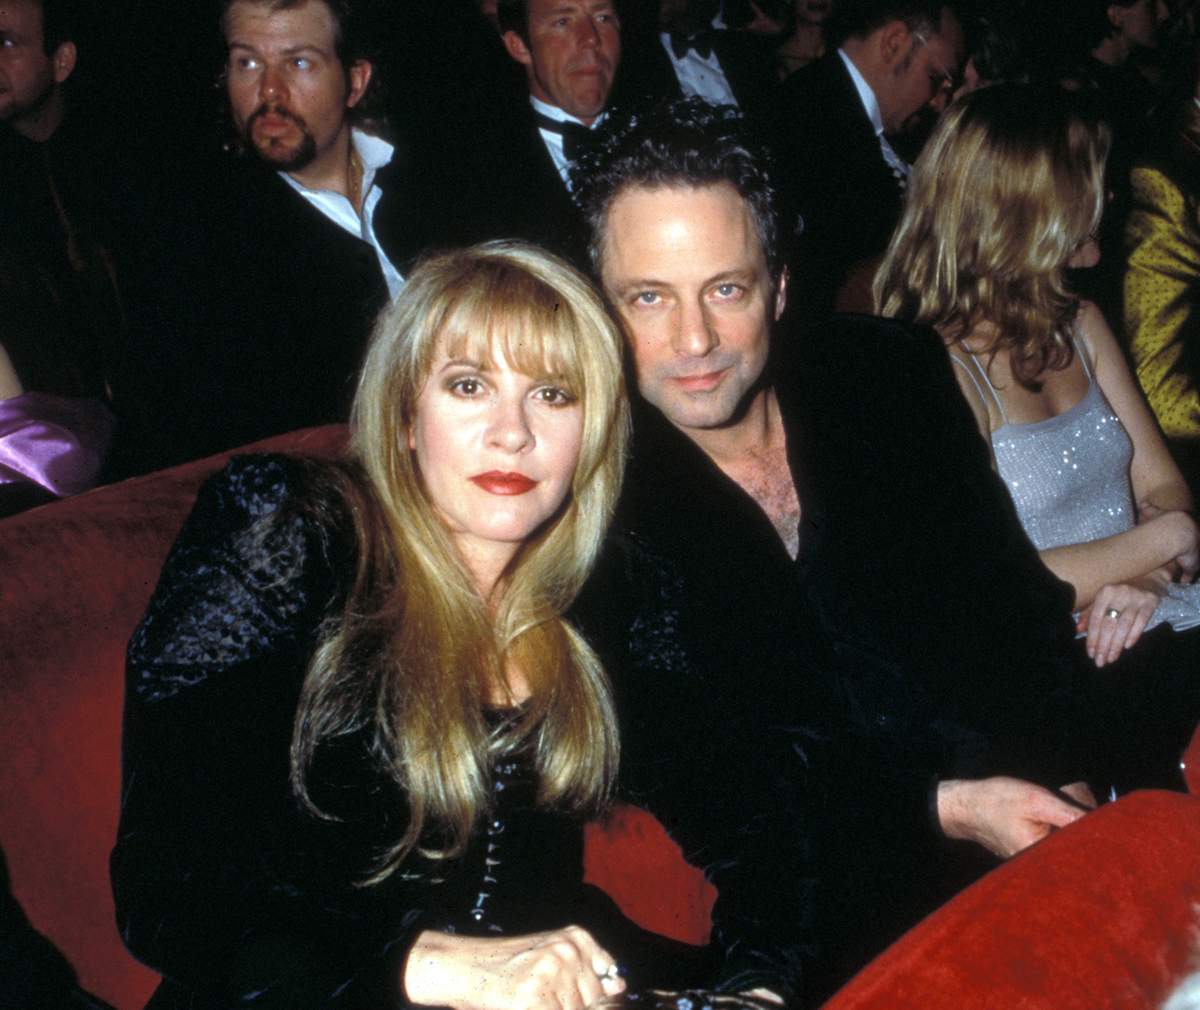 Stevie Nicks and Lindsey Bucking sit next to each other at an event.